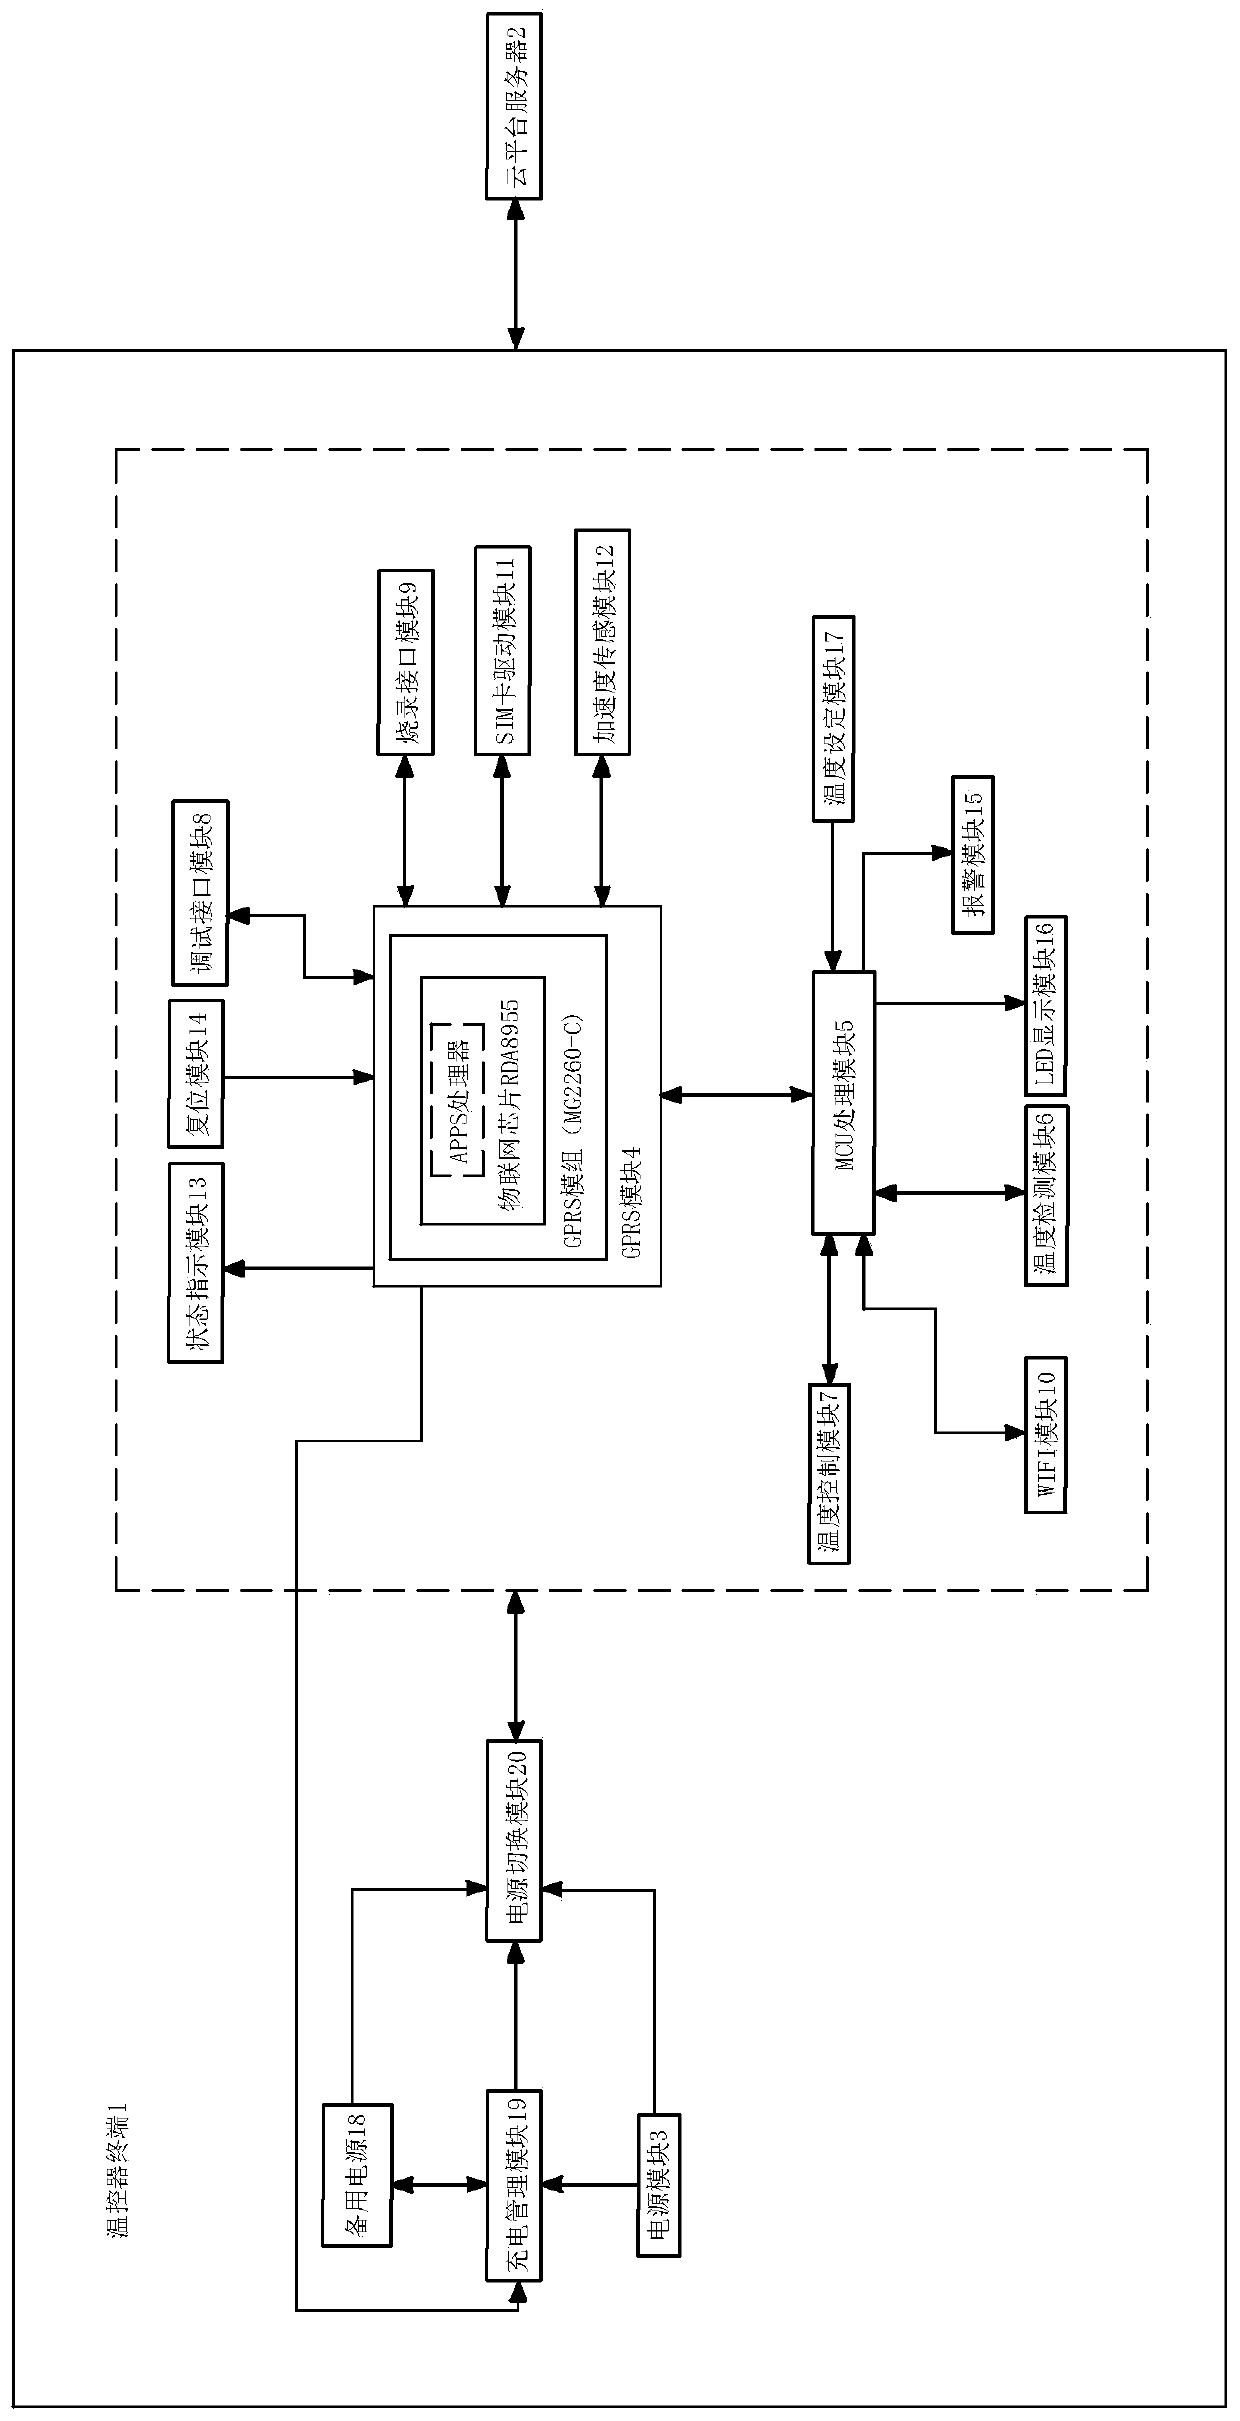 Cold chain equipment temperature control system and method based on GPRS technology OpenCPU development platform